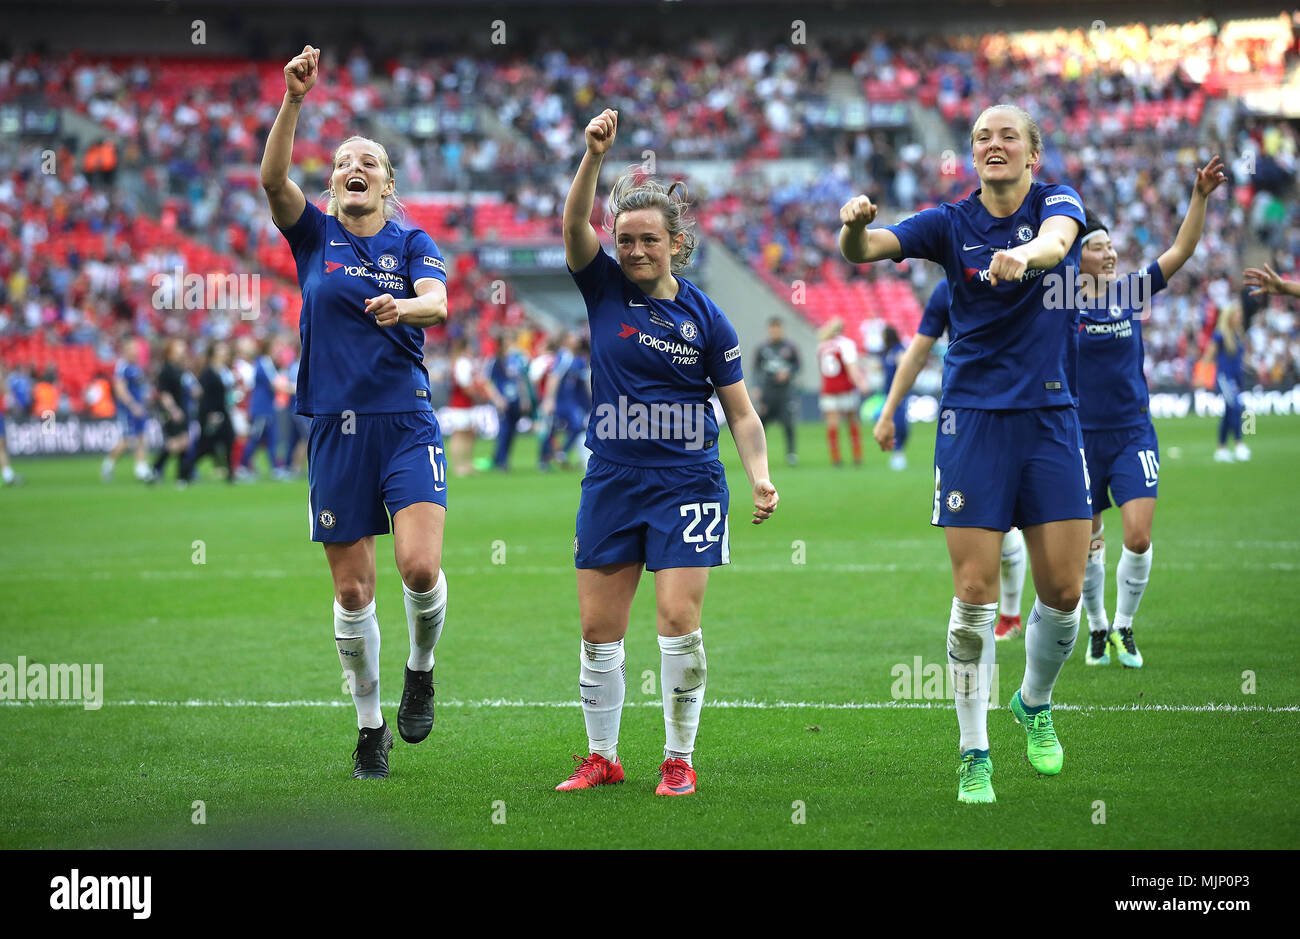 Chelsea Ladies' Katie Chapman (left) and Erin Cuthbert (centre), Magdalena Eriksson (right) celebrate after the final whistle during the SSE Women's FA Cup Final at Wembley Stadium, London. PRESS ASSOCIATION Photo. Picture date: Saturday May 5, 2018. See PA story SOCCER Women Final. Photo credit should read: Adam Davy/PA Wire. RESTRICTIONS: No use with unauthorised audio, video, data, fixture lists, club/league logos or 'live' services. Online in-match use limited to 75 images, no video emulation. No use in betting, games or single club/league/player publications. Stock Photo